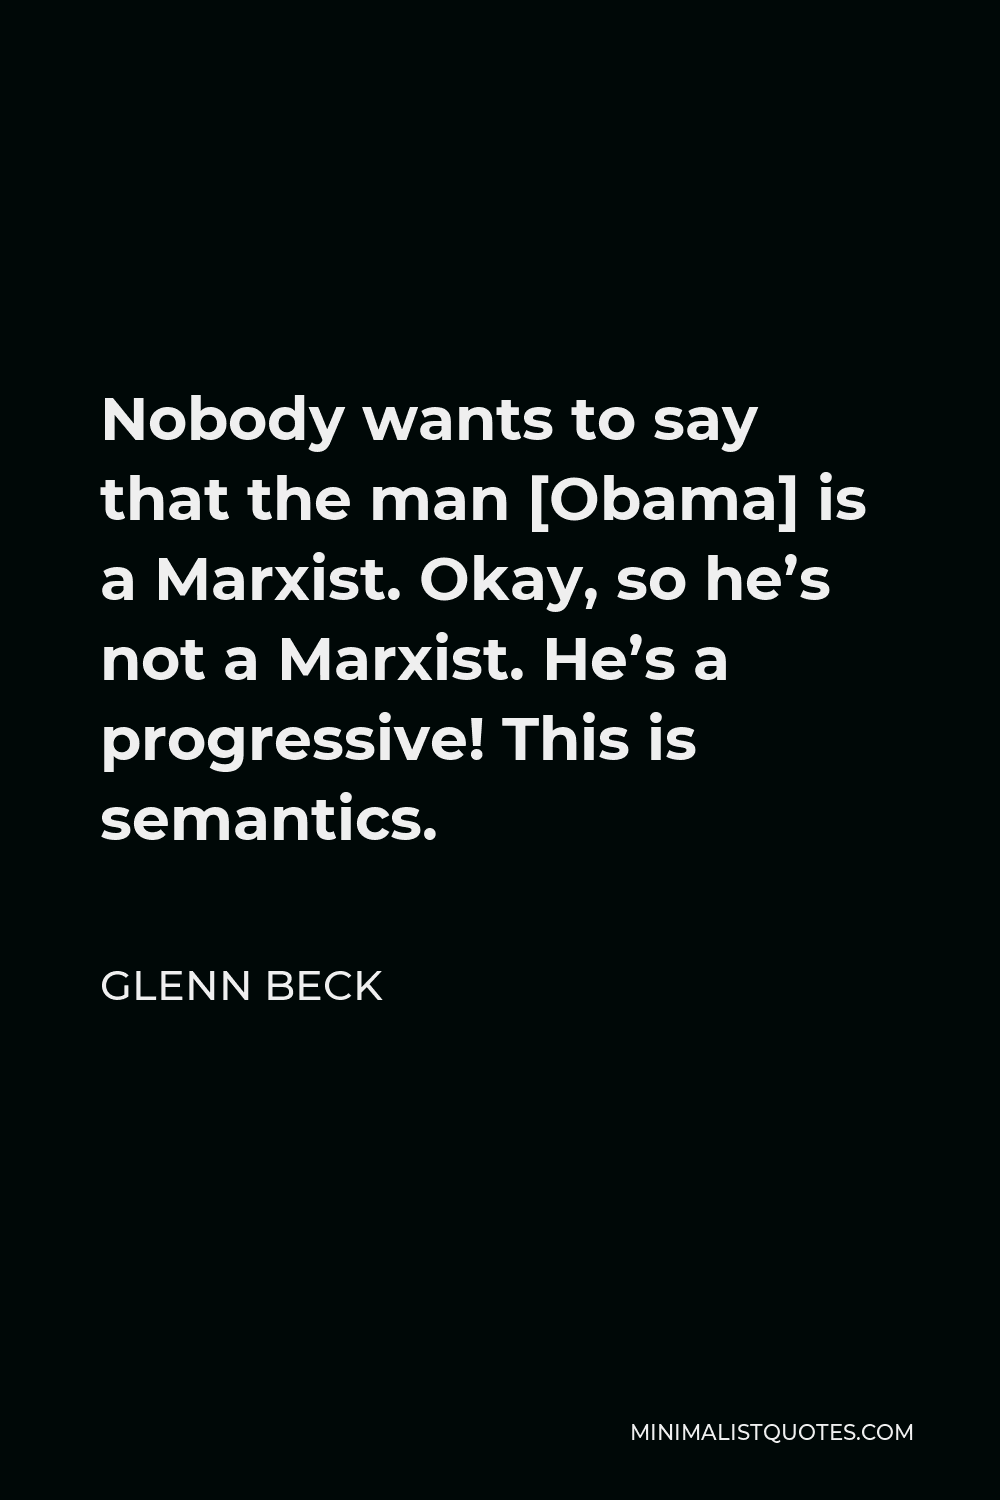 Glenn Beck Quote - Nobody wants to say that the man [Obama] is a Marxist. Okay, so he’s not a Marxist. He’s a progressive! This is semantics.